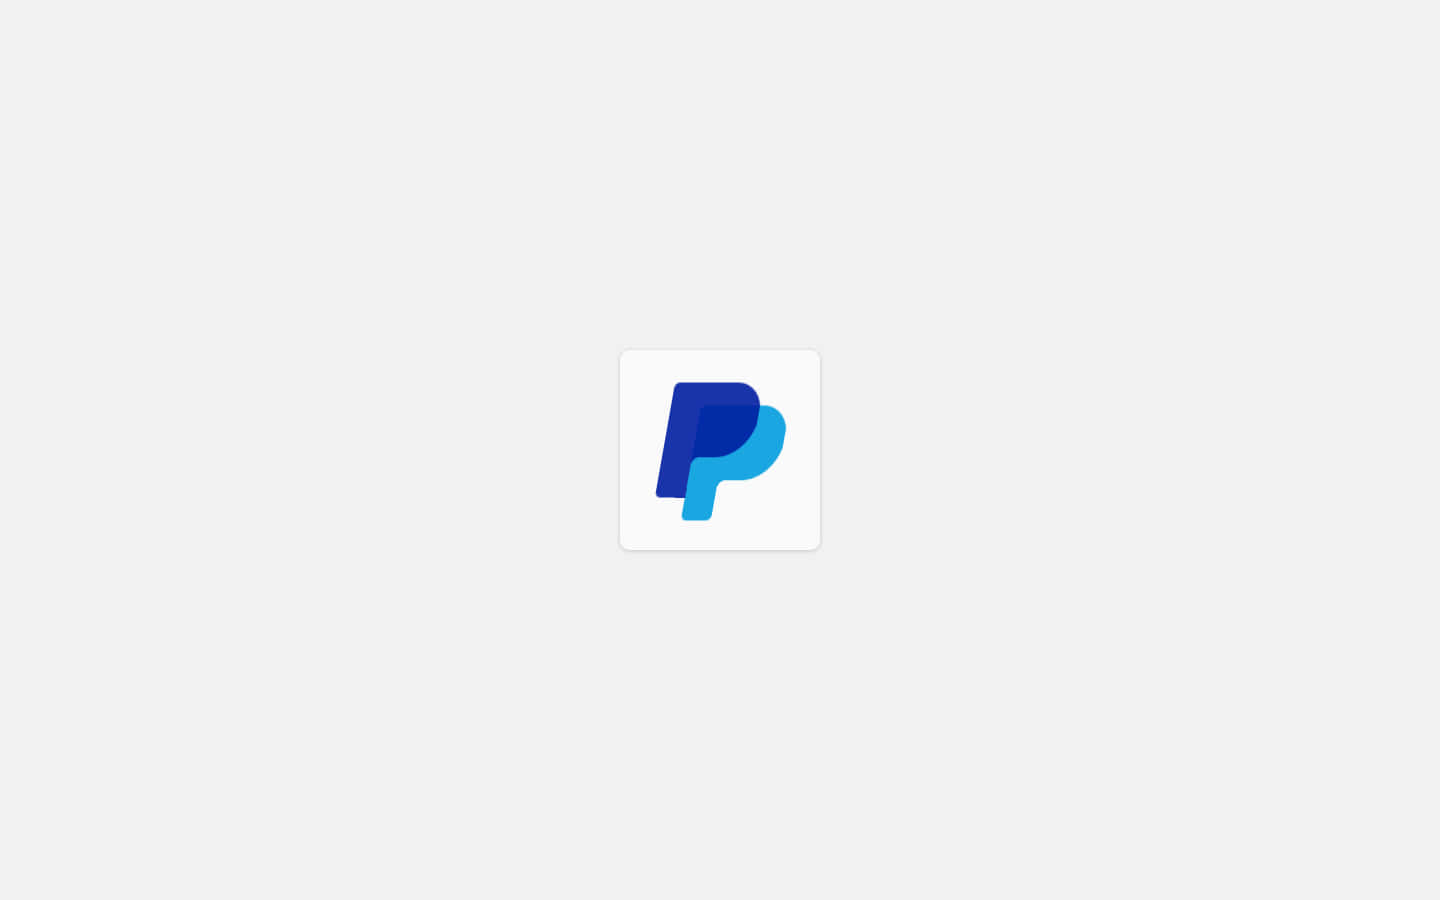 Make payments securely and conveniently with PayPal